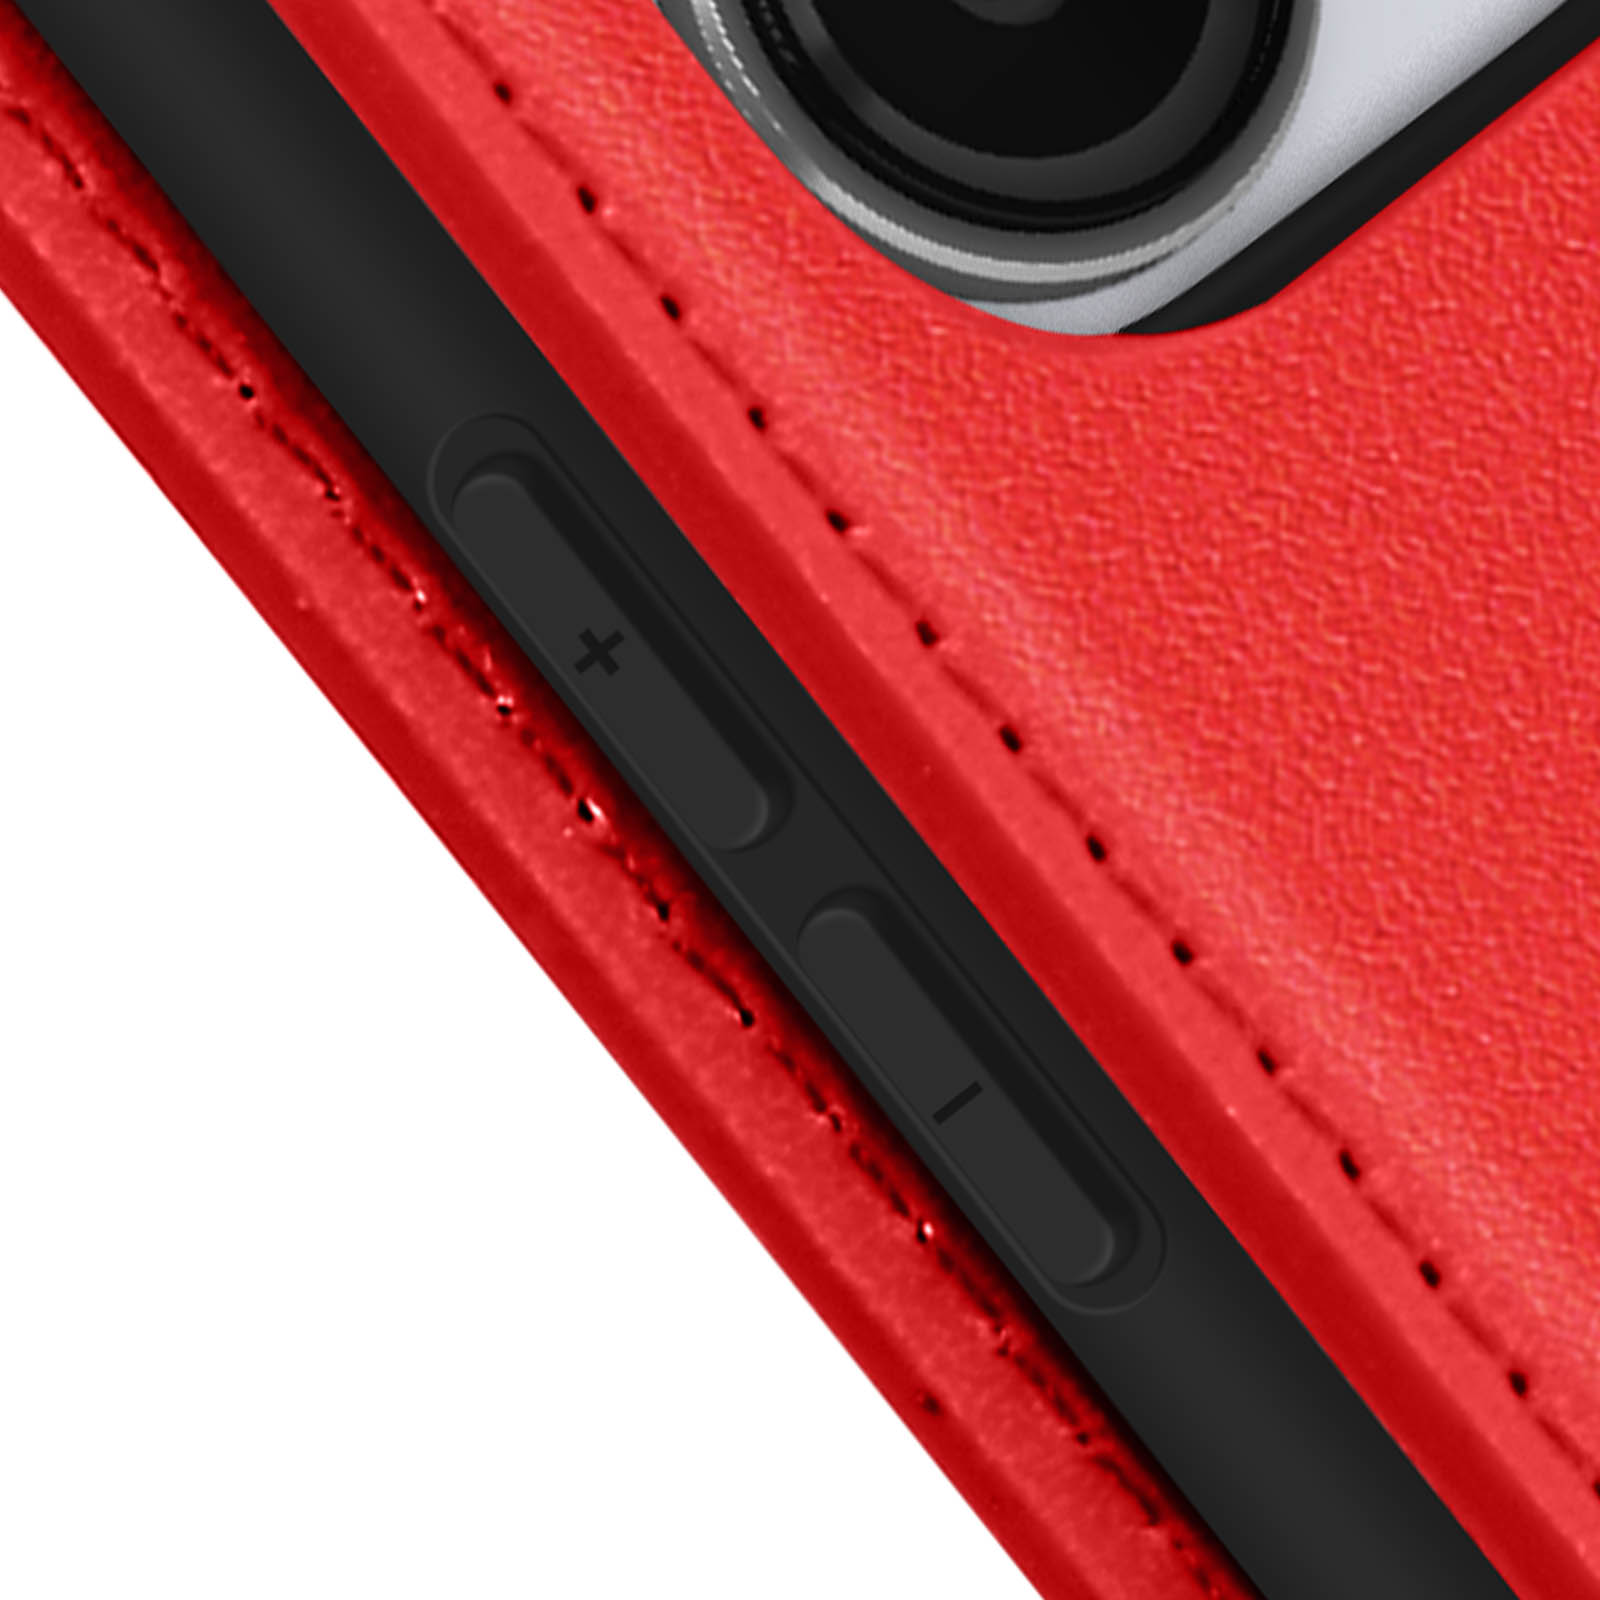 Rot mit Magnetklappe Bookcover, AVIZAR Nokia G10, Classic Edition, Series, Backcover Nokia,